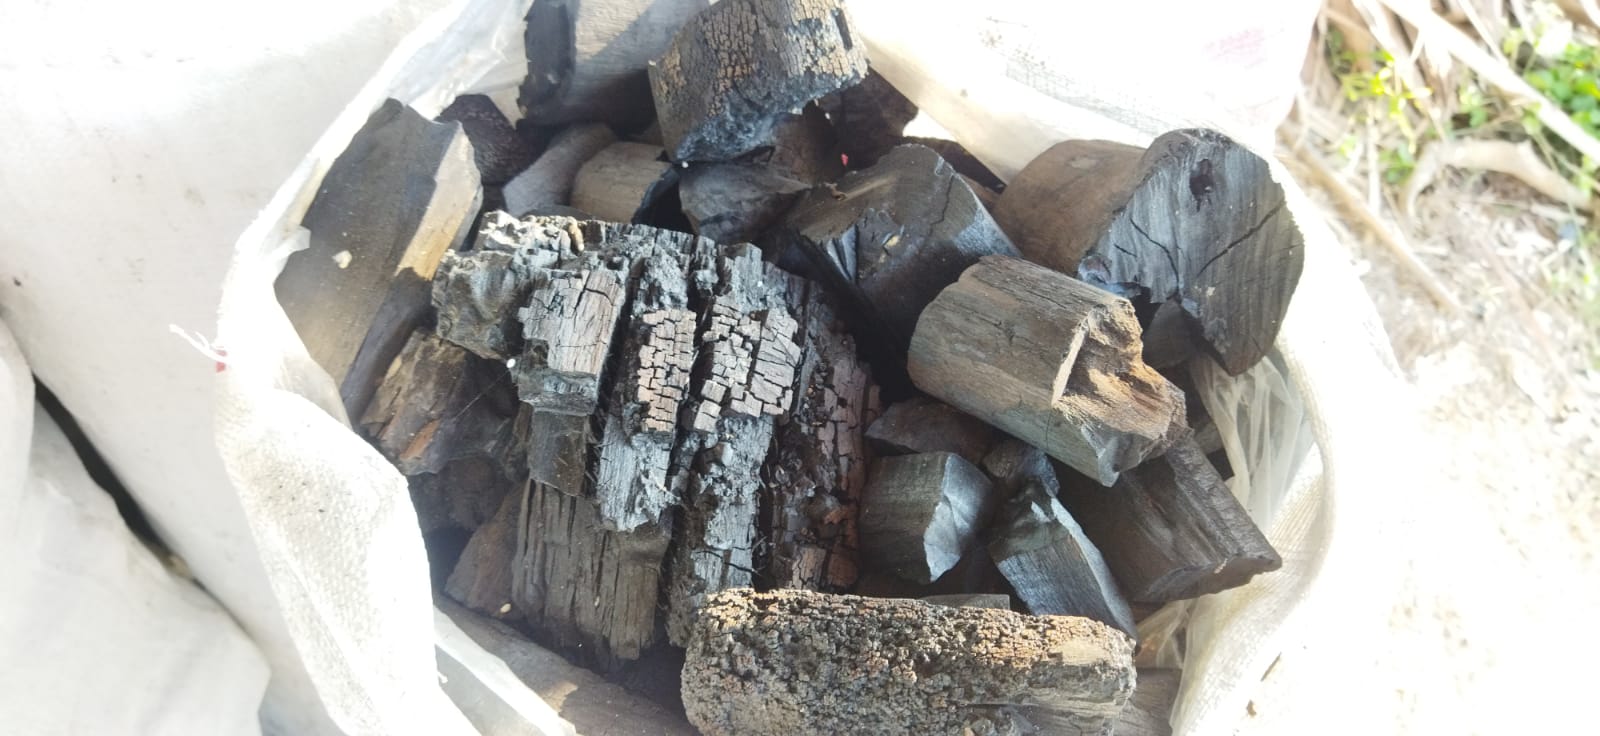 The Advantages of Choosing Indonesia as Your Hardwood Charcoal Supply Partner